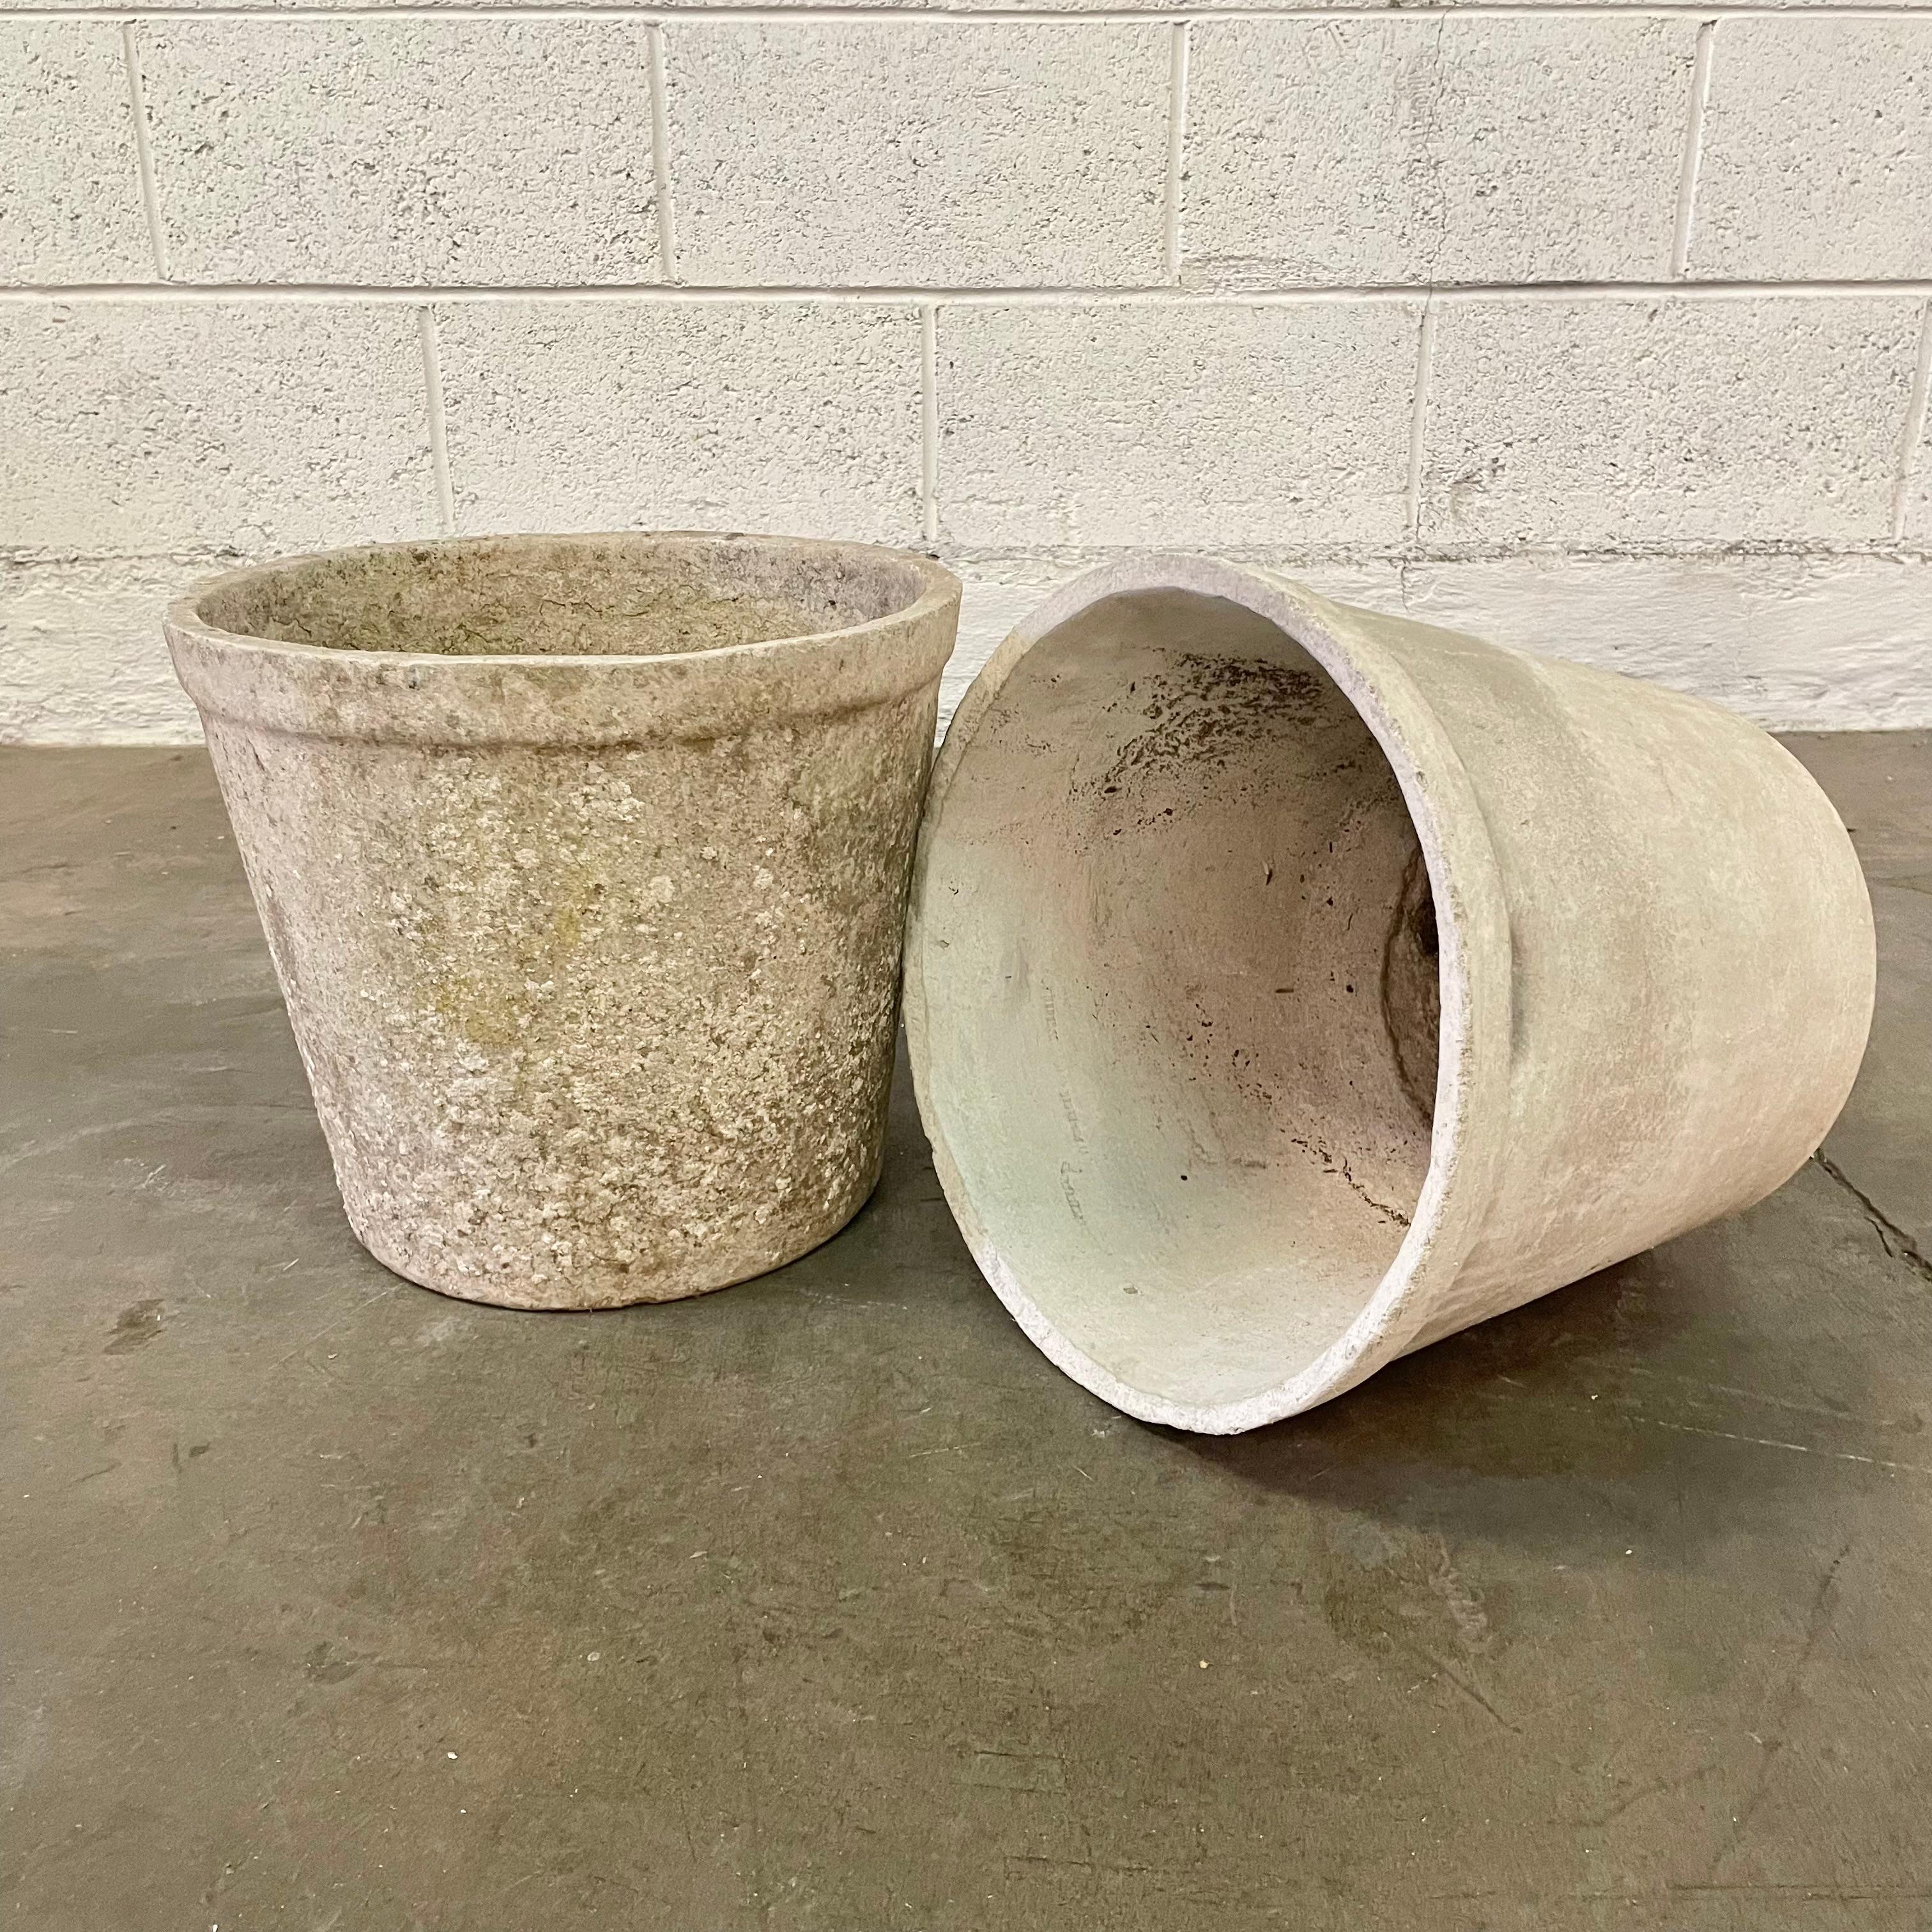 Perfect concrete flower pots by Willy Guhl. Made in Switzerland in the 1960s. Great vintage condition with unique patina on each as shown. Classic flower pot design with large basin and banded lip at the top. 2 available. Priced individually. 


